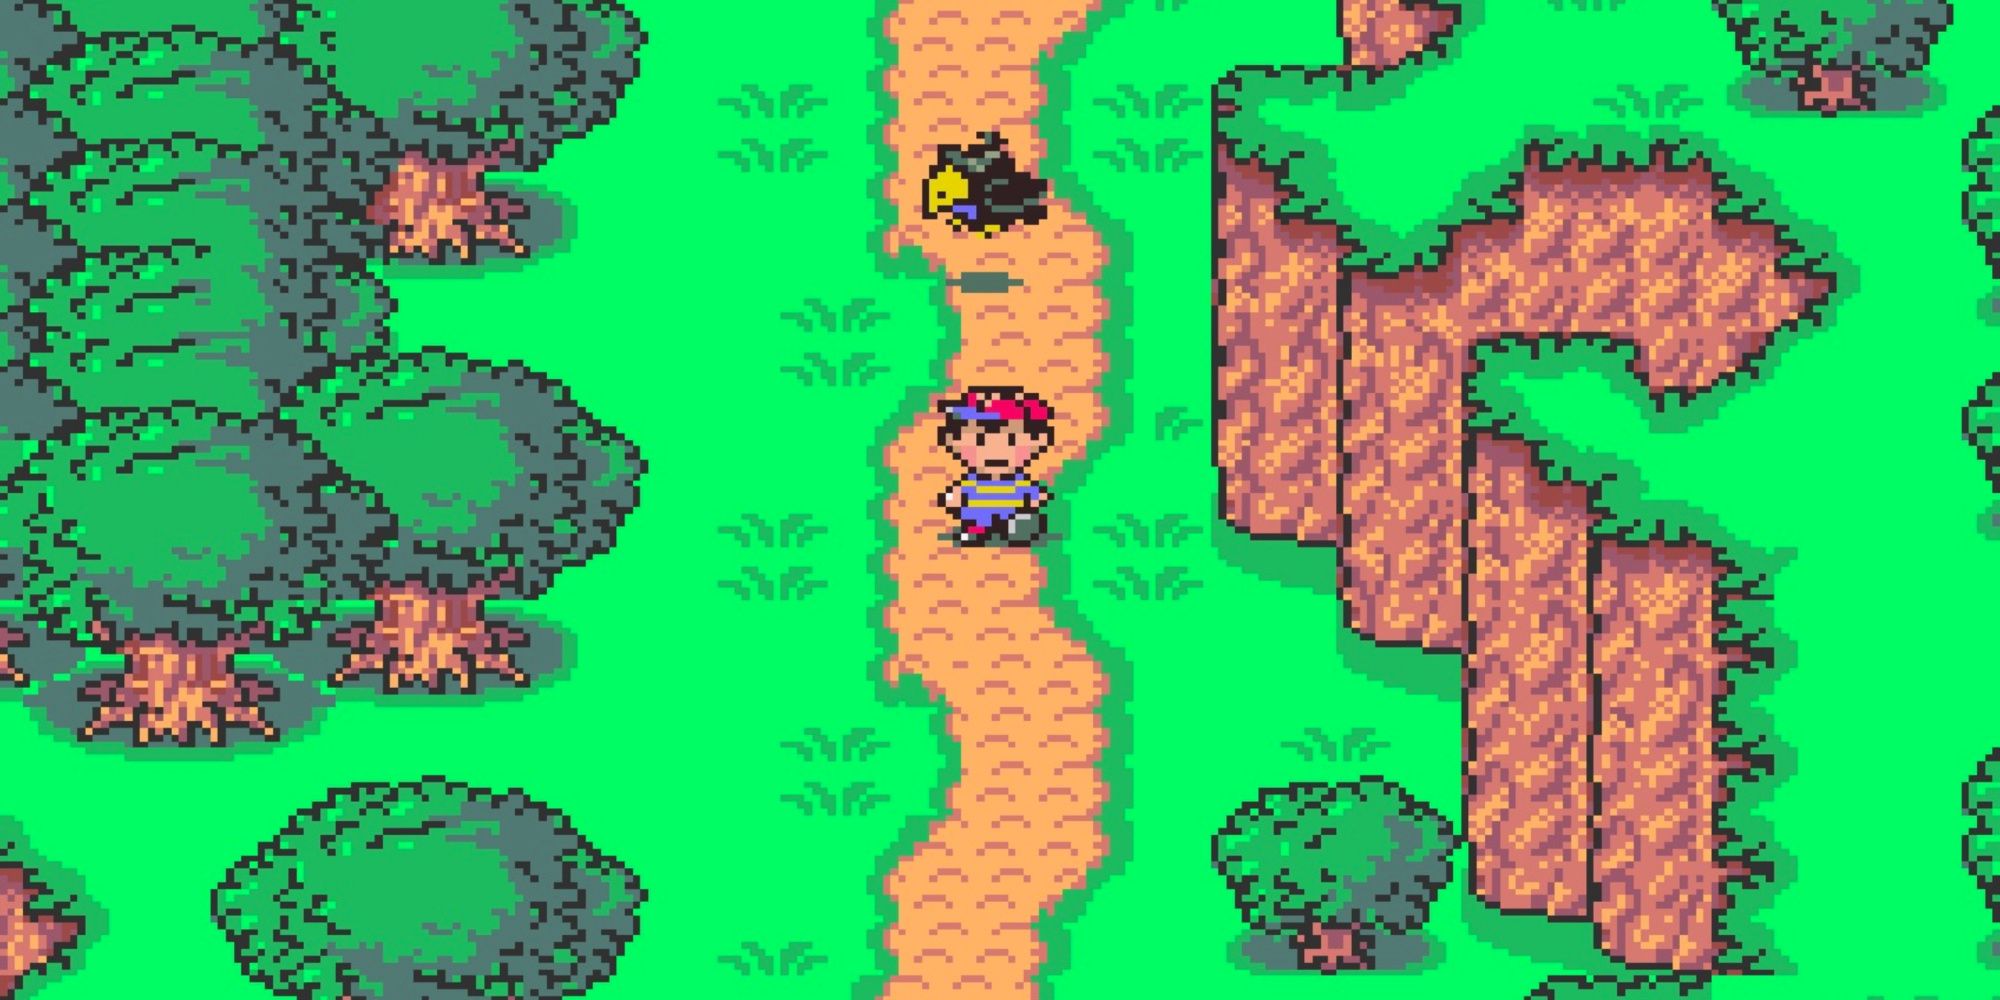 Explore the world with EarthBound